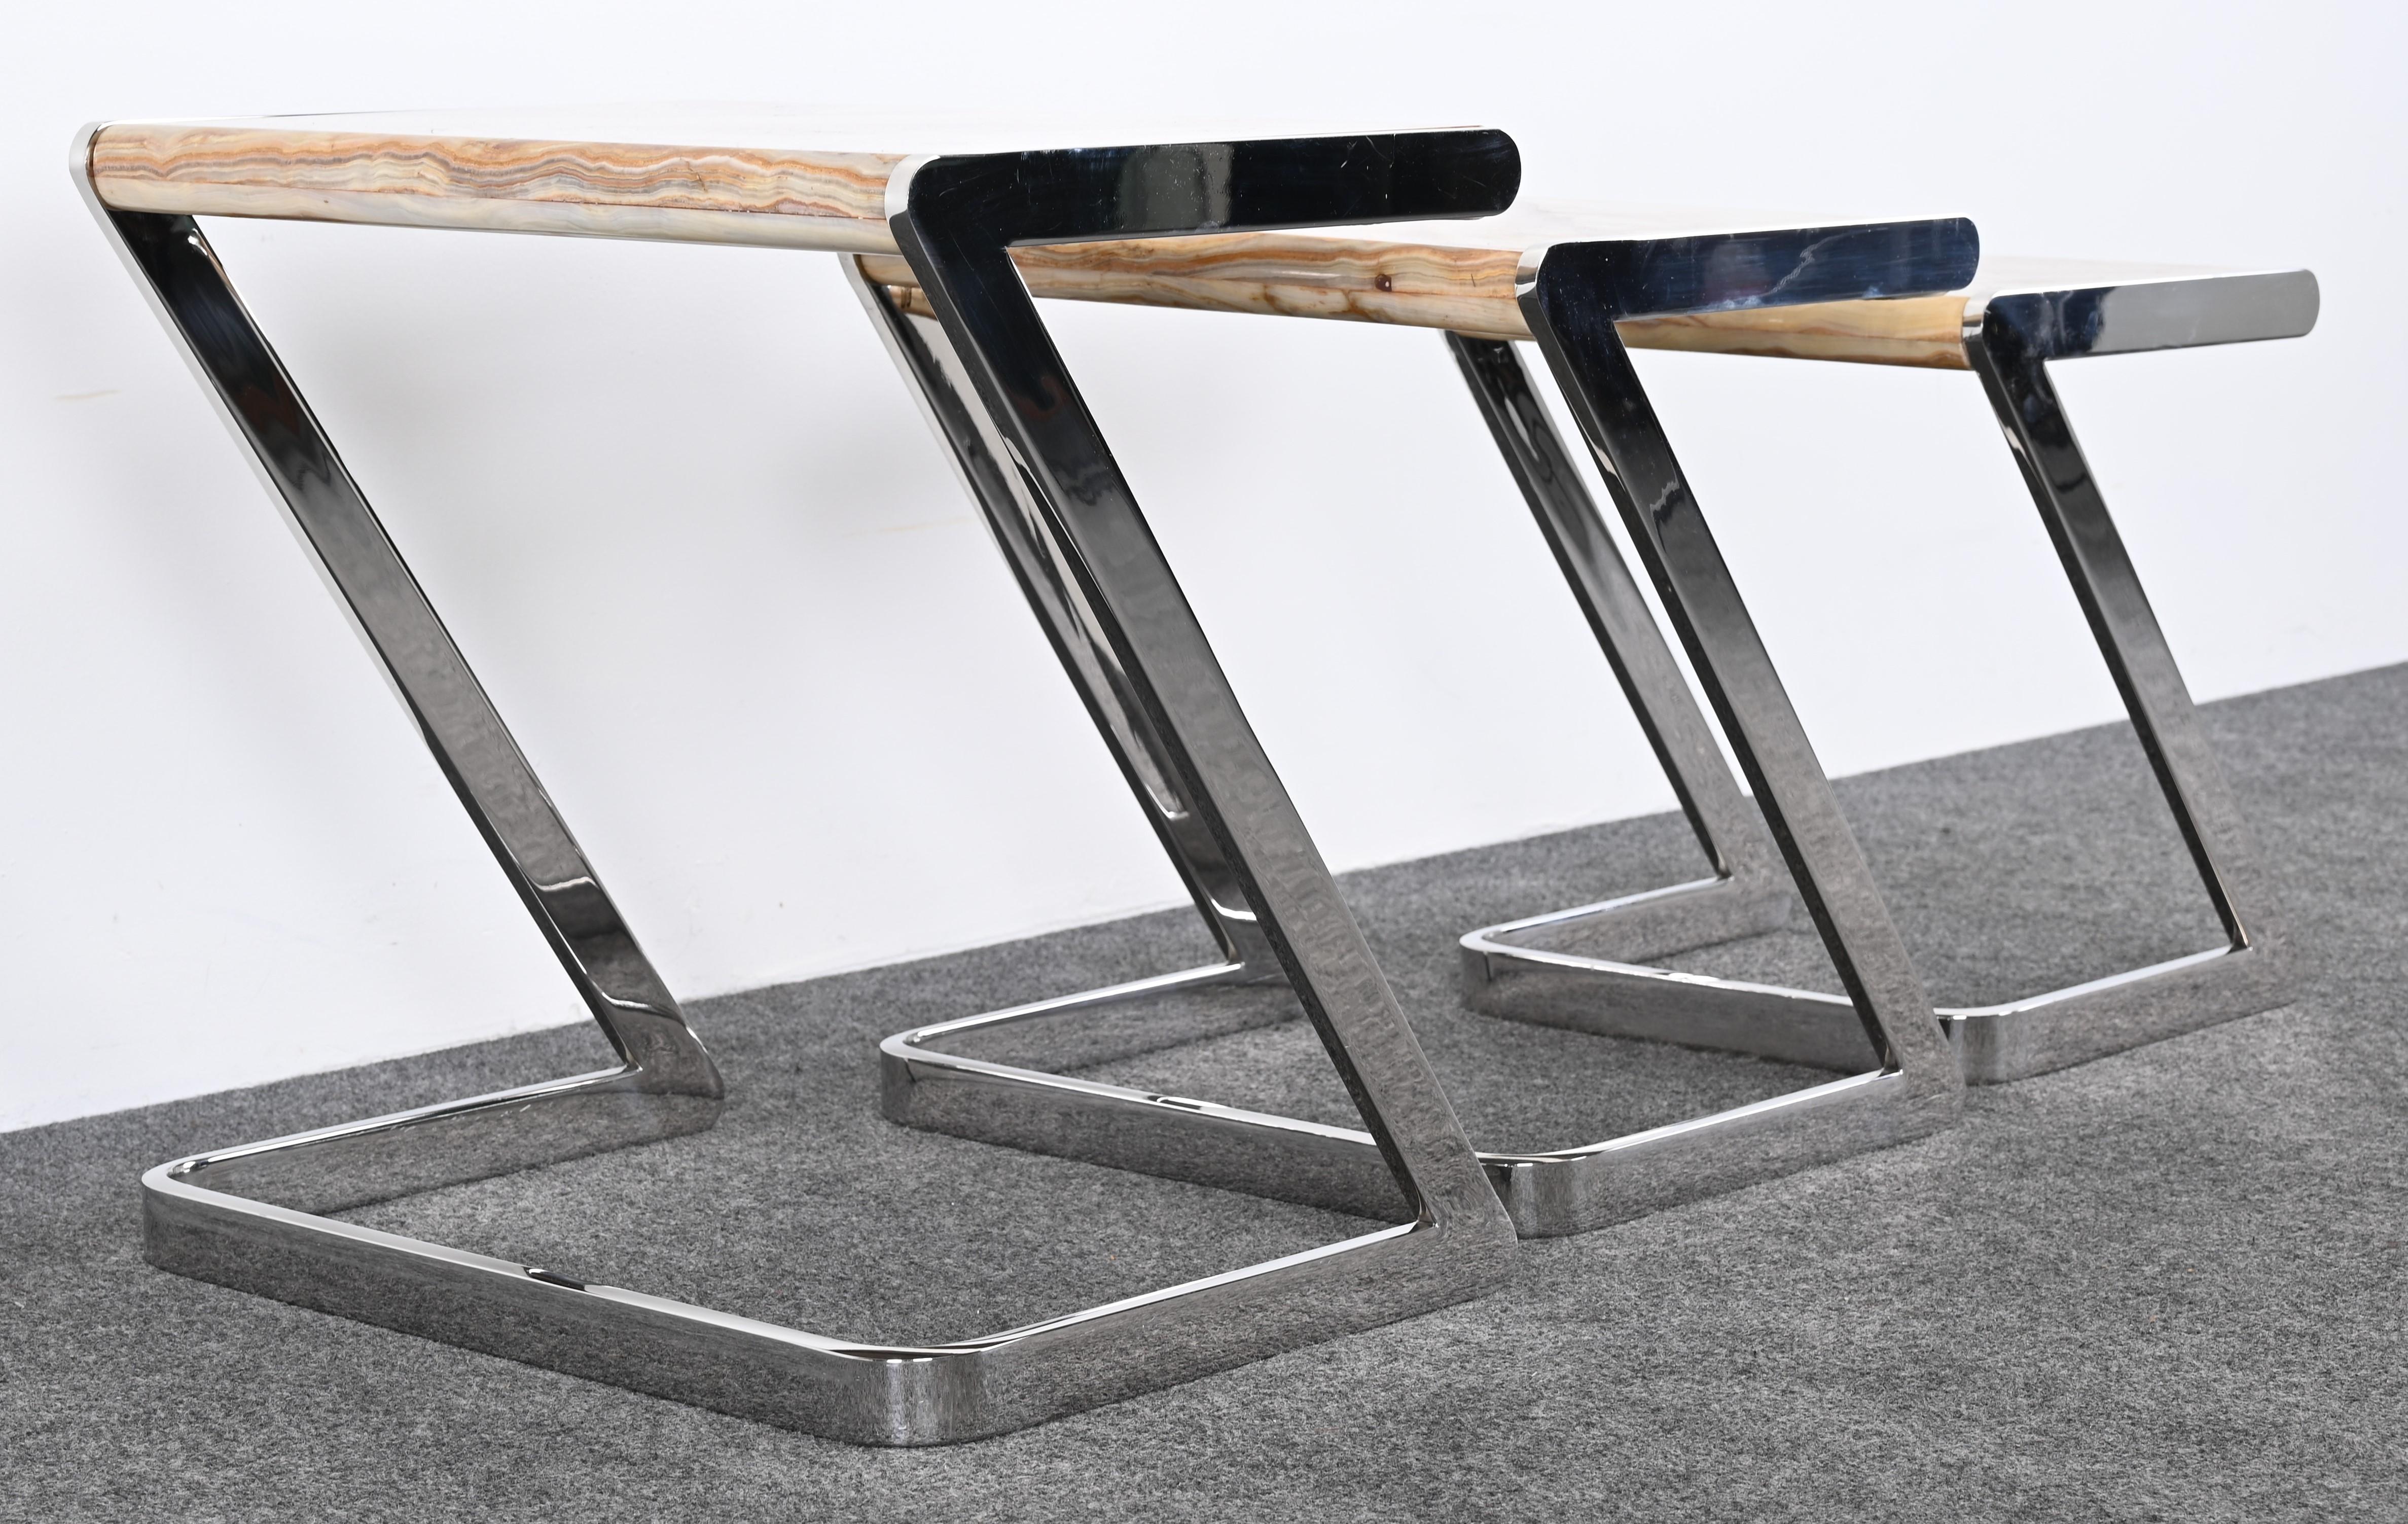 Onyx and Stainless Steel Nesting Tables by Brueton, 1980s For Sale 2